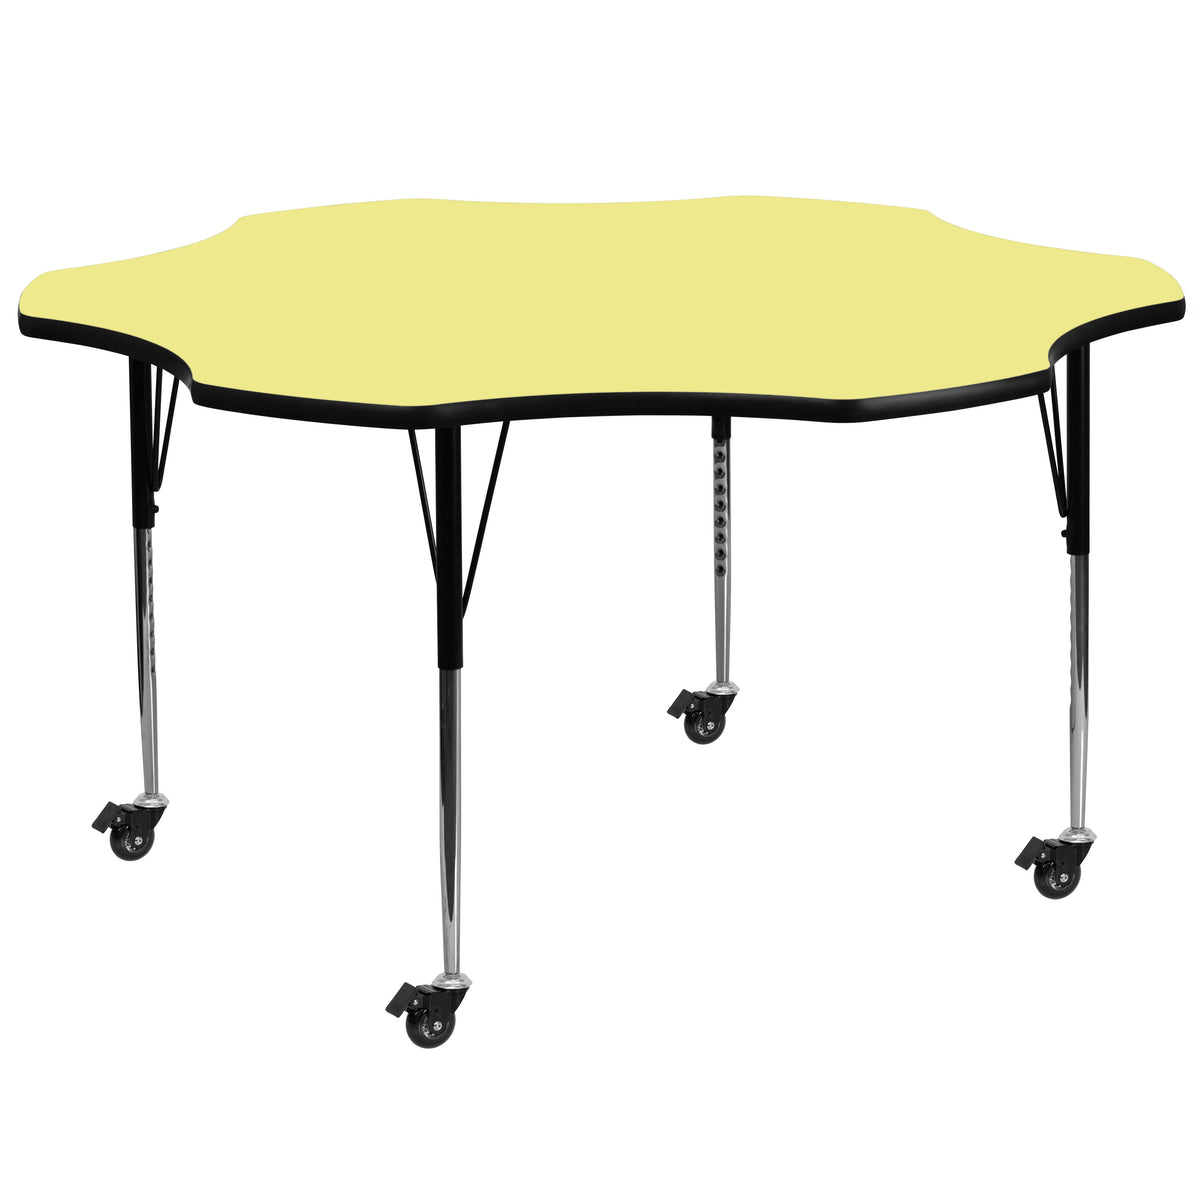 Yellow |#| Mobile 60inch Flower Yellow Thermal Laminate Activity Table-Height Adjustable Legs